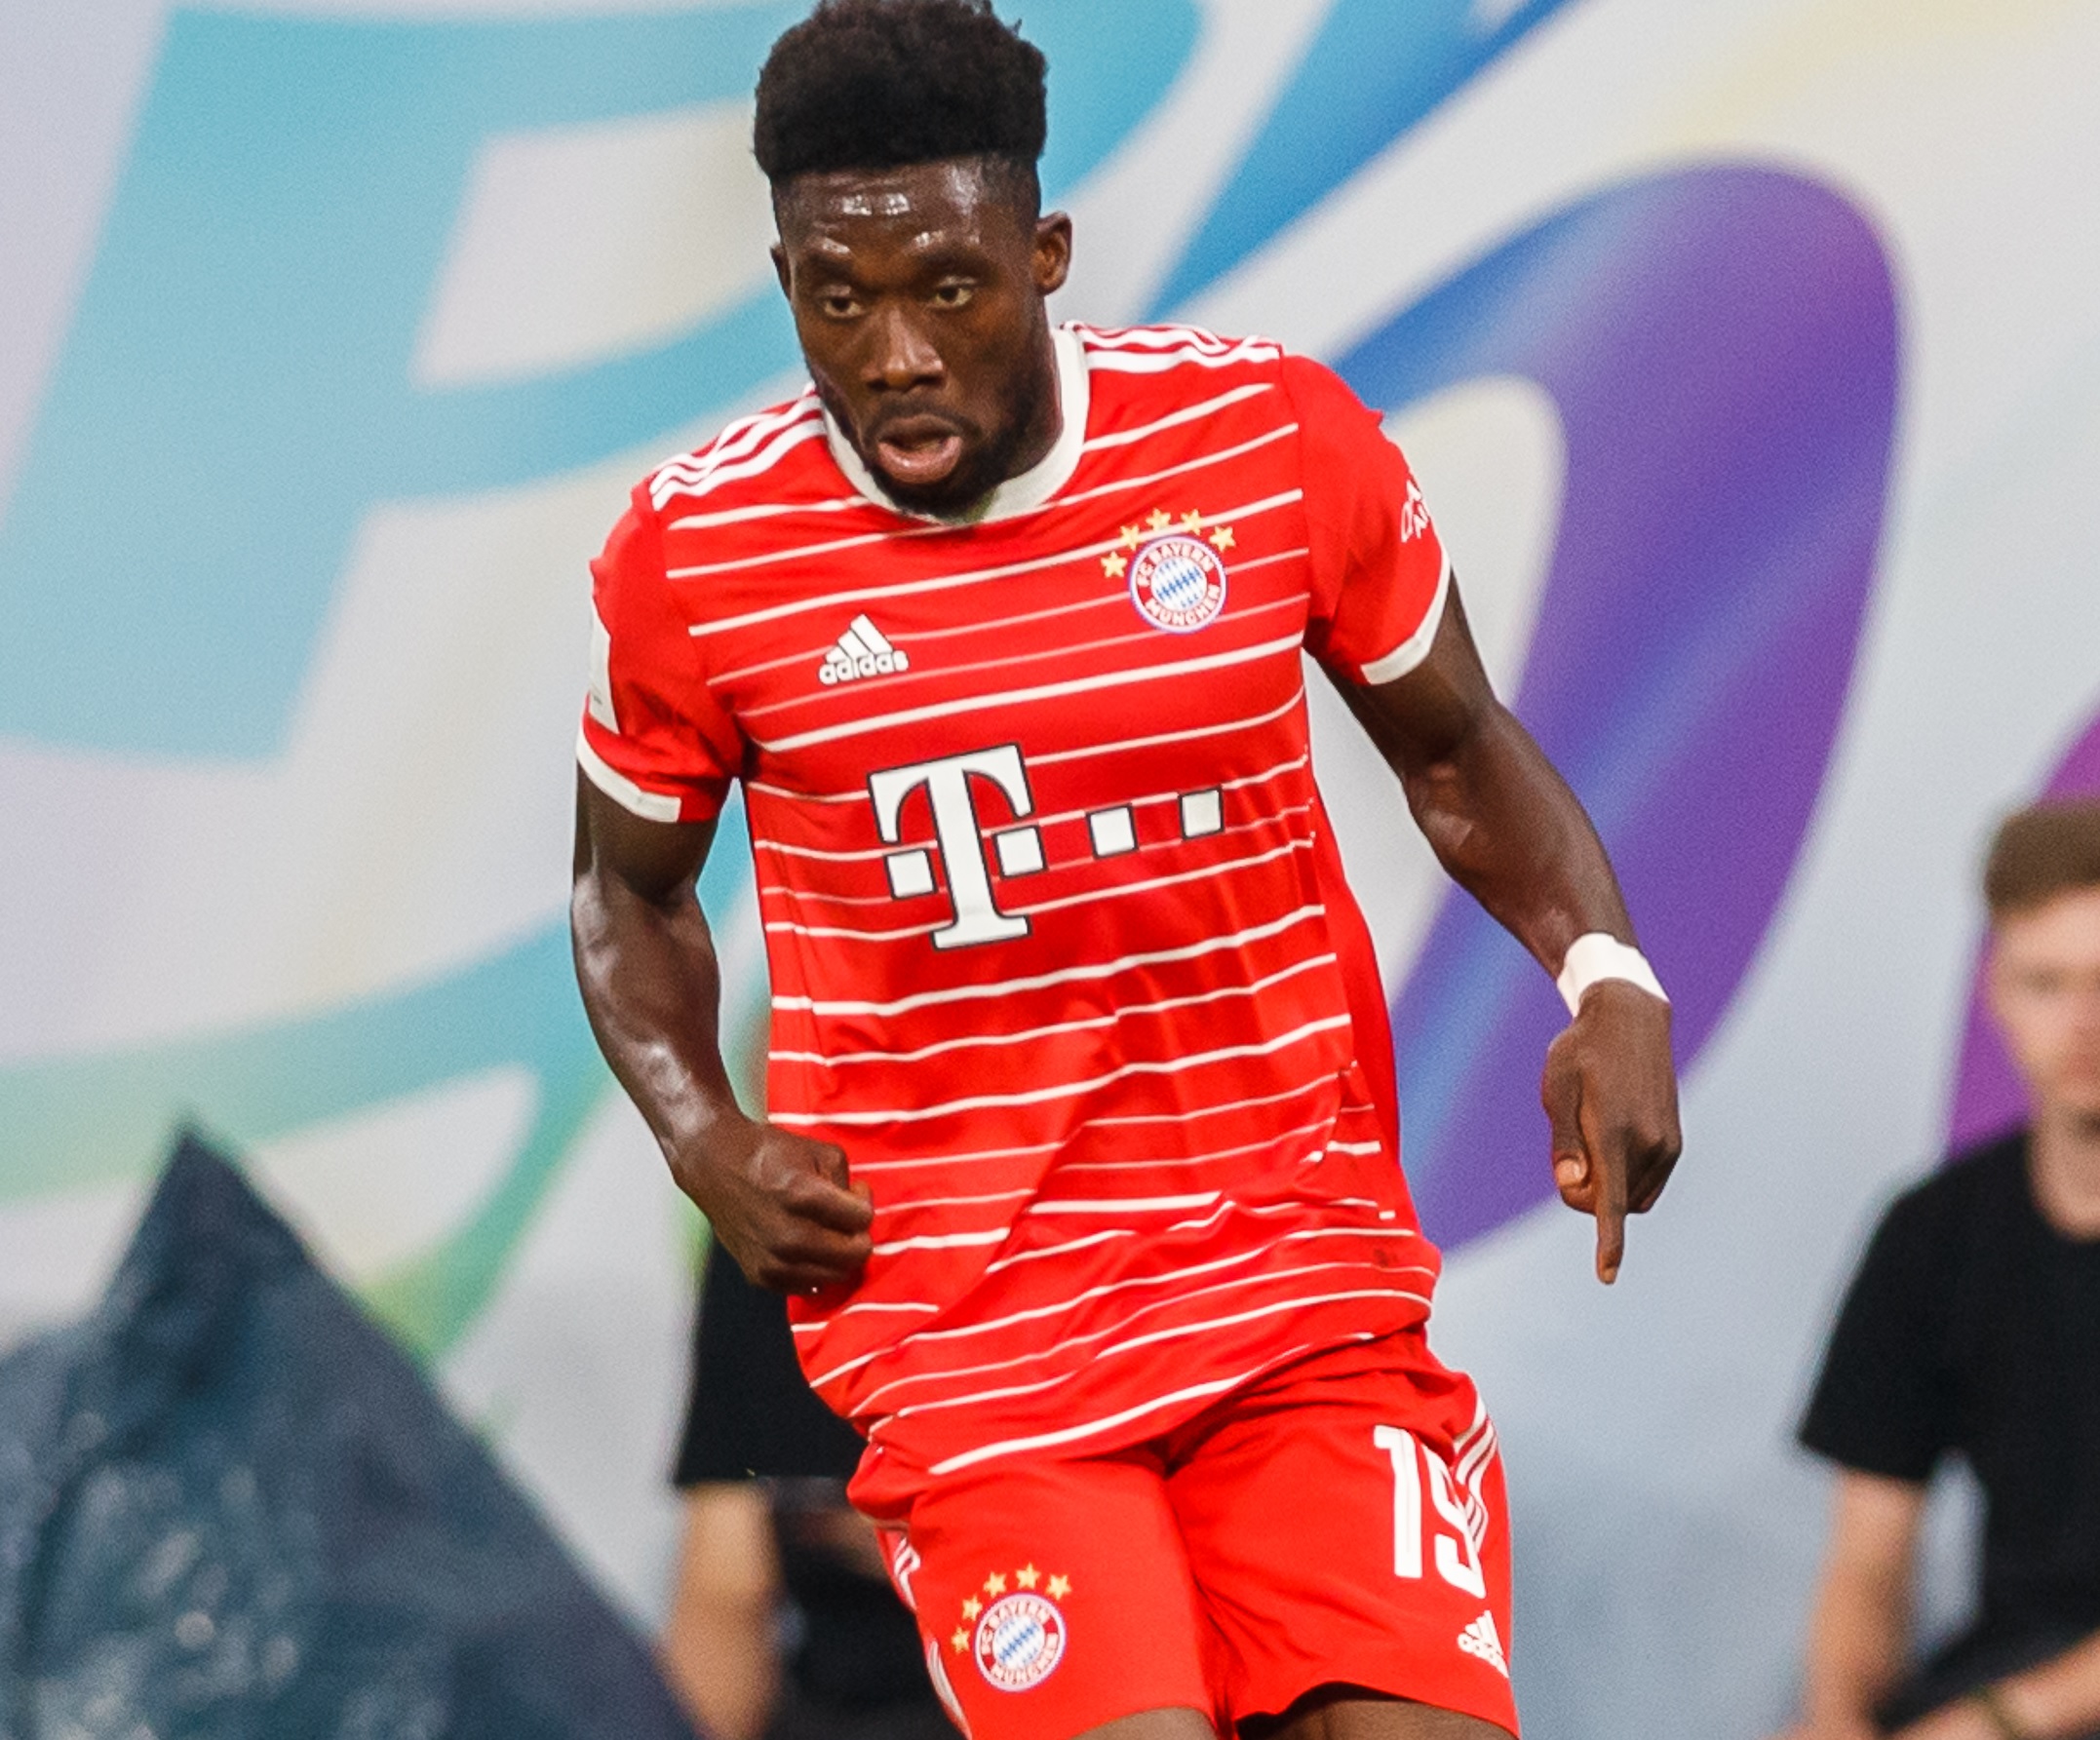 We know it's going to be tough, but we are ready for the fight - Alphonso  Davies reveals Bayern Munich target for 2022-23 season